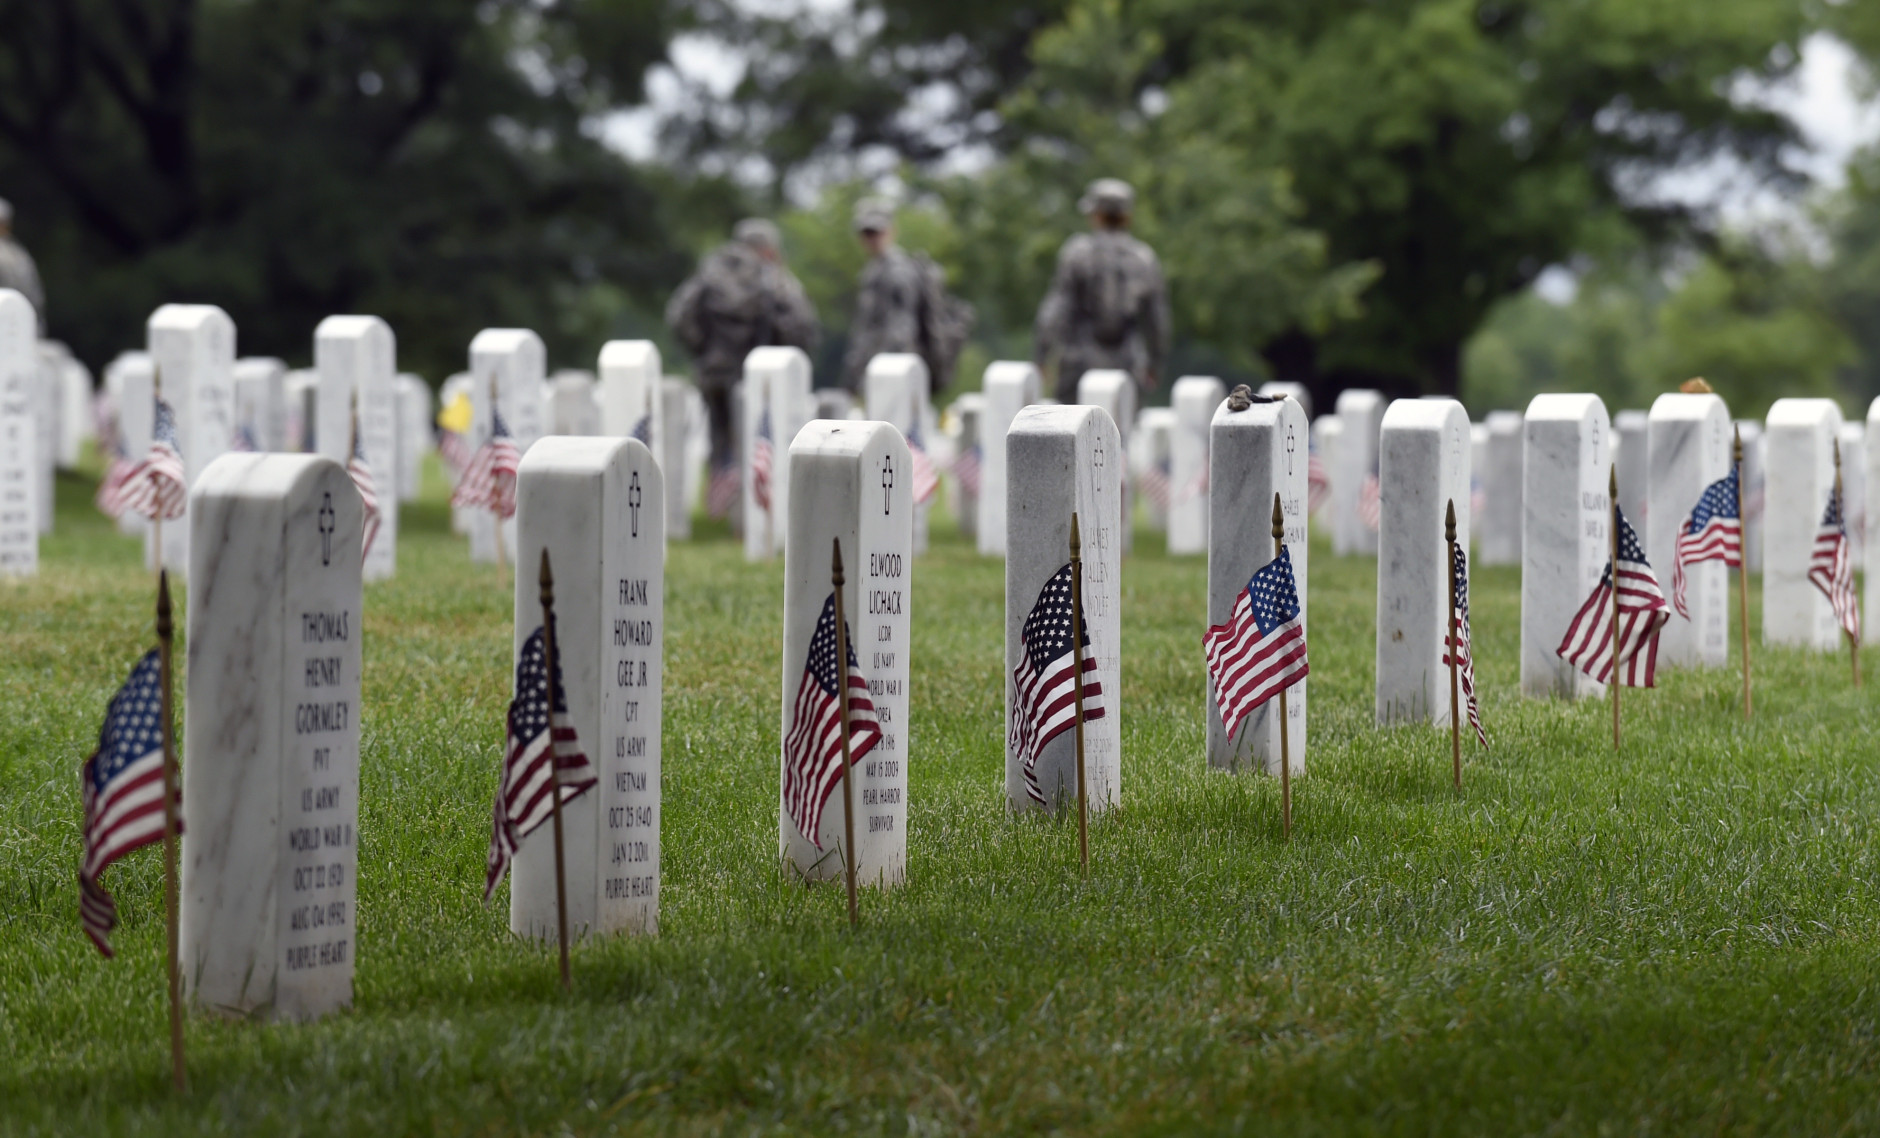 Members of the 3rd U.S. Infantry Regiment (The Old Guard) place a flag in front of each headstone at Arlington National Cemetery in Arlington, Va., Thursday, May 21, 2015. "Flags In" is an annual tradition that is reserved for The Old Guard since its designation as the Armys official ceremonial unit in 1948. They conduct the mission annually at Arlington National Cemetery and the U.S. Soldiers' and Airmen's Home National Cemetery prior to Memorial Day to honor the nations fallen military heroes. (AP Photo/Susan Walsh)